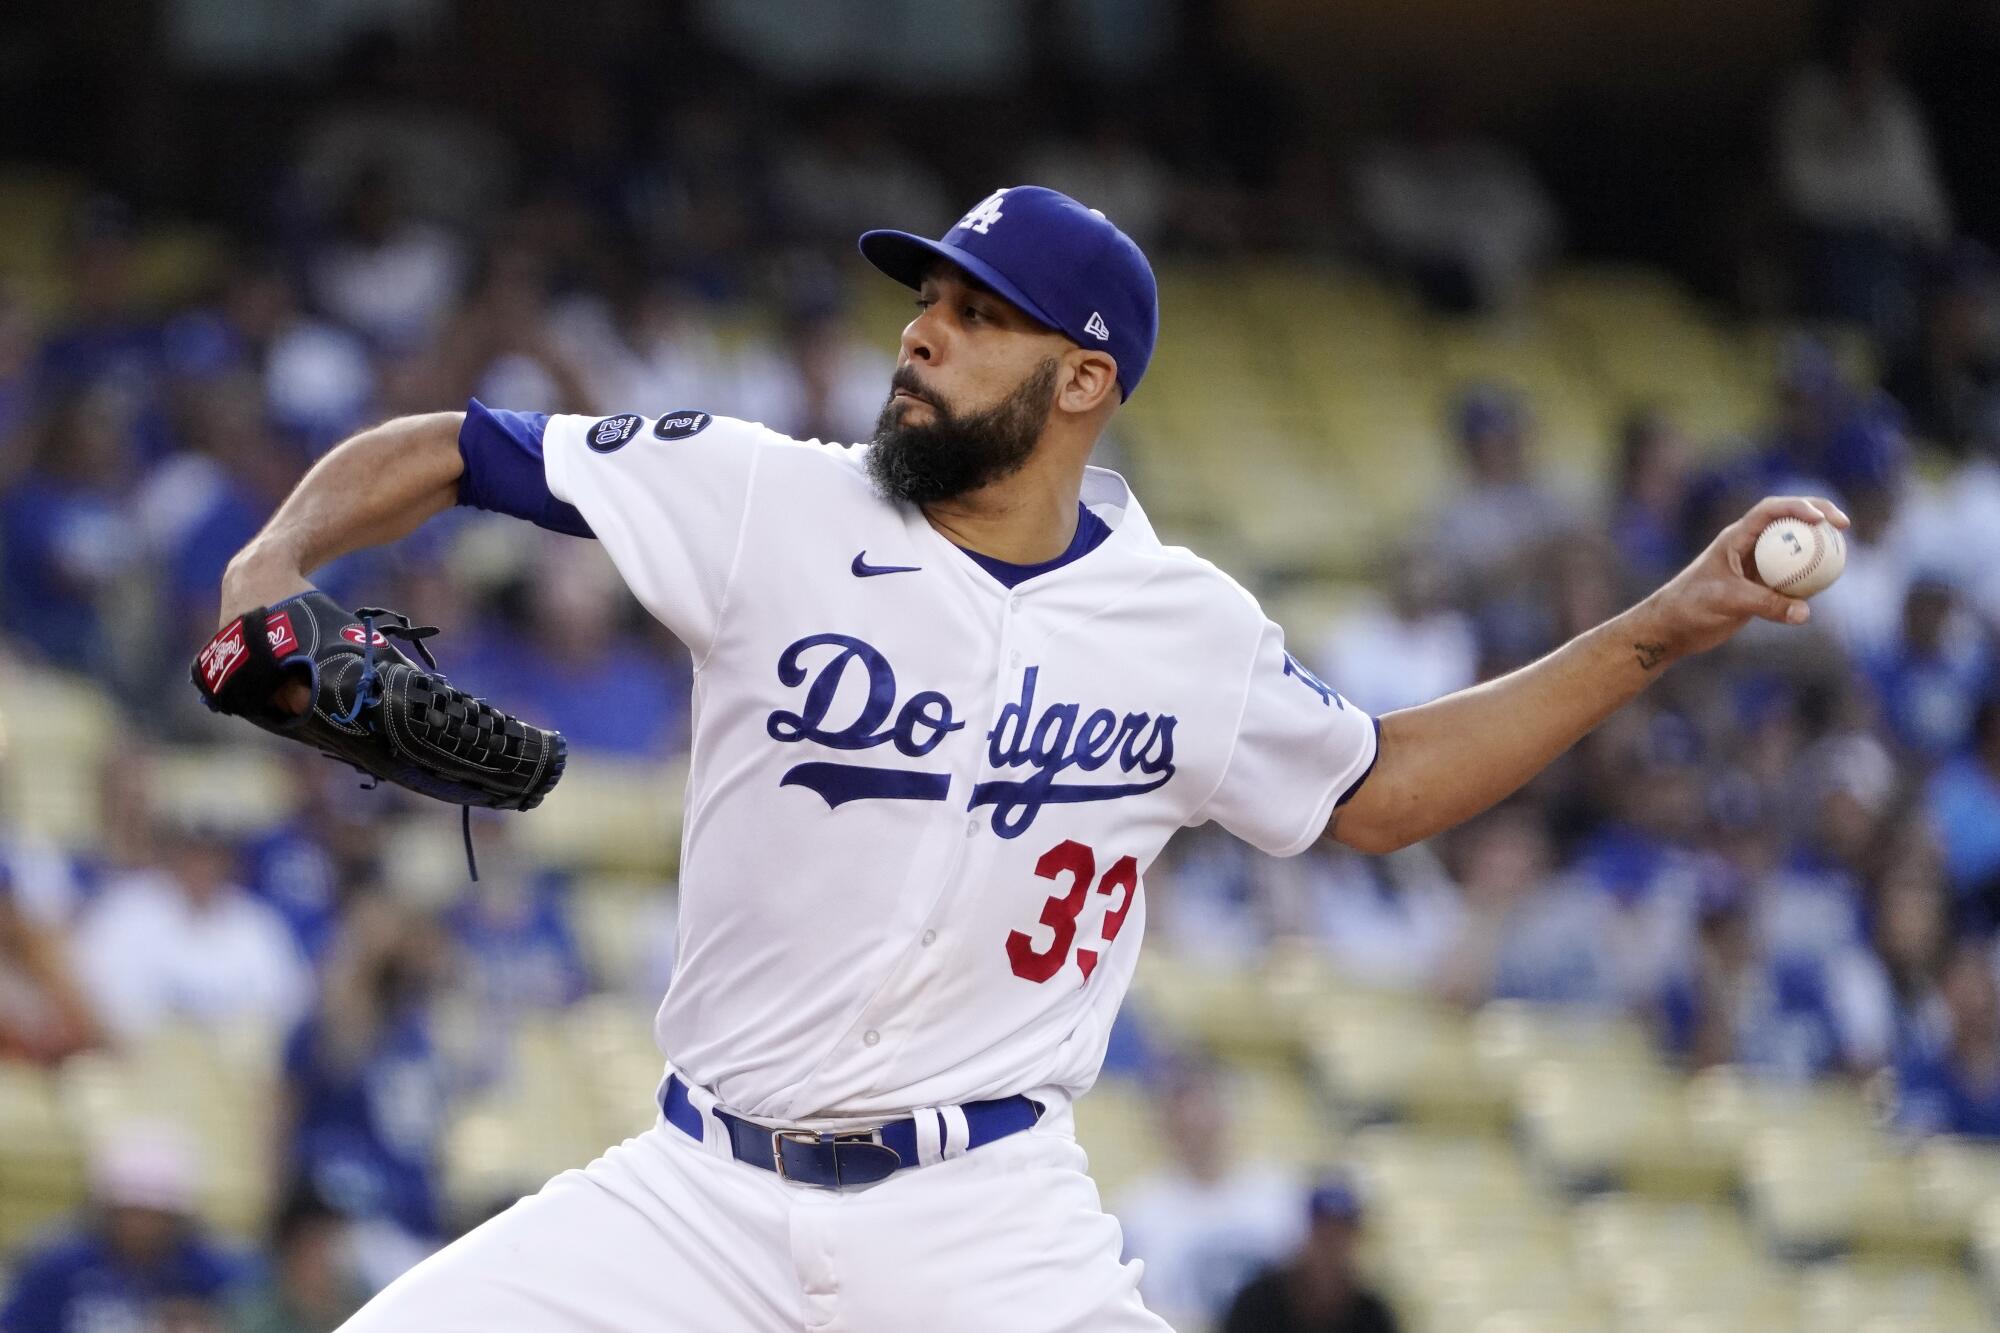 David Price starts for the Dodgers on Thursday.